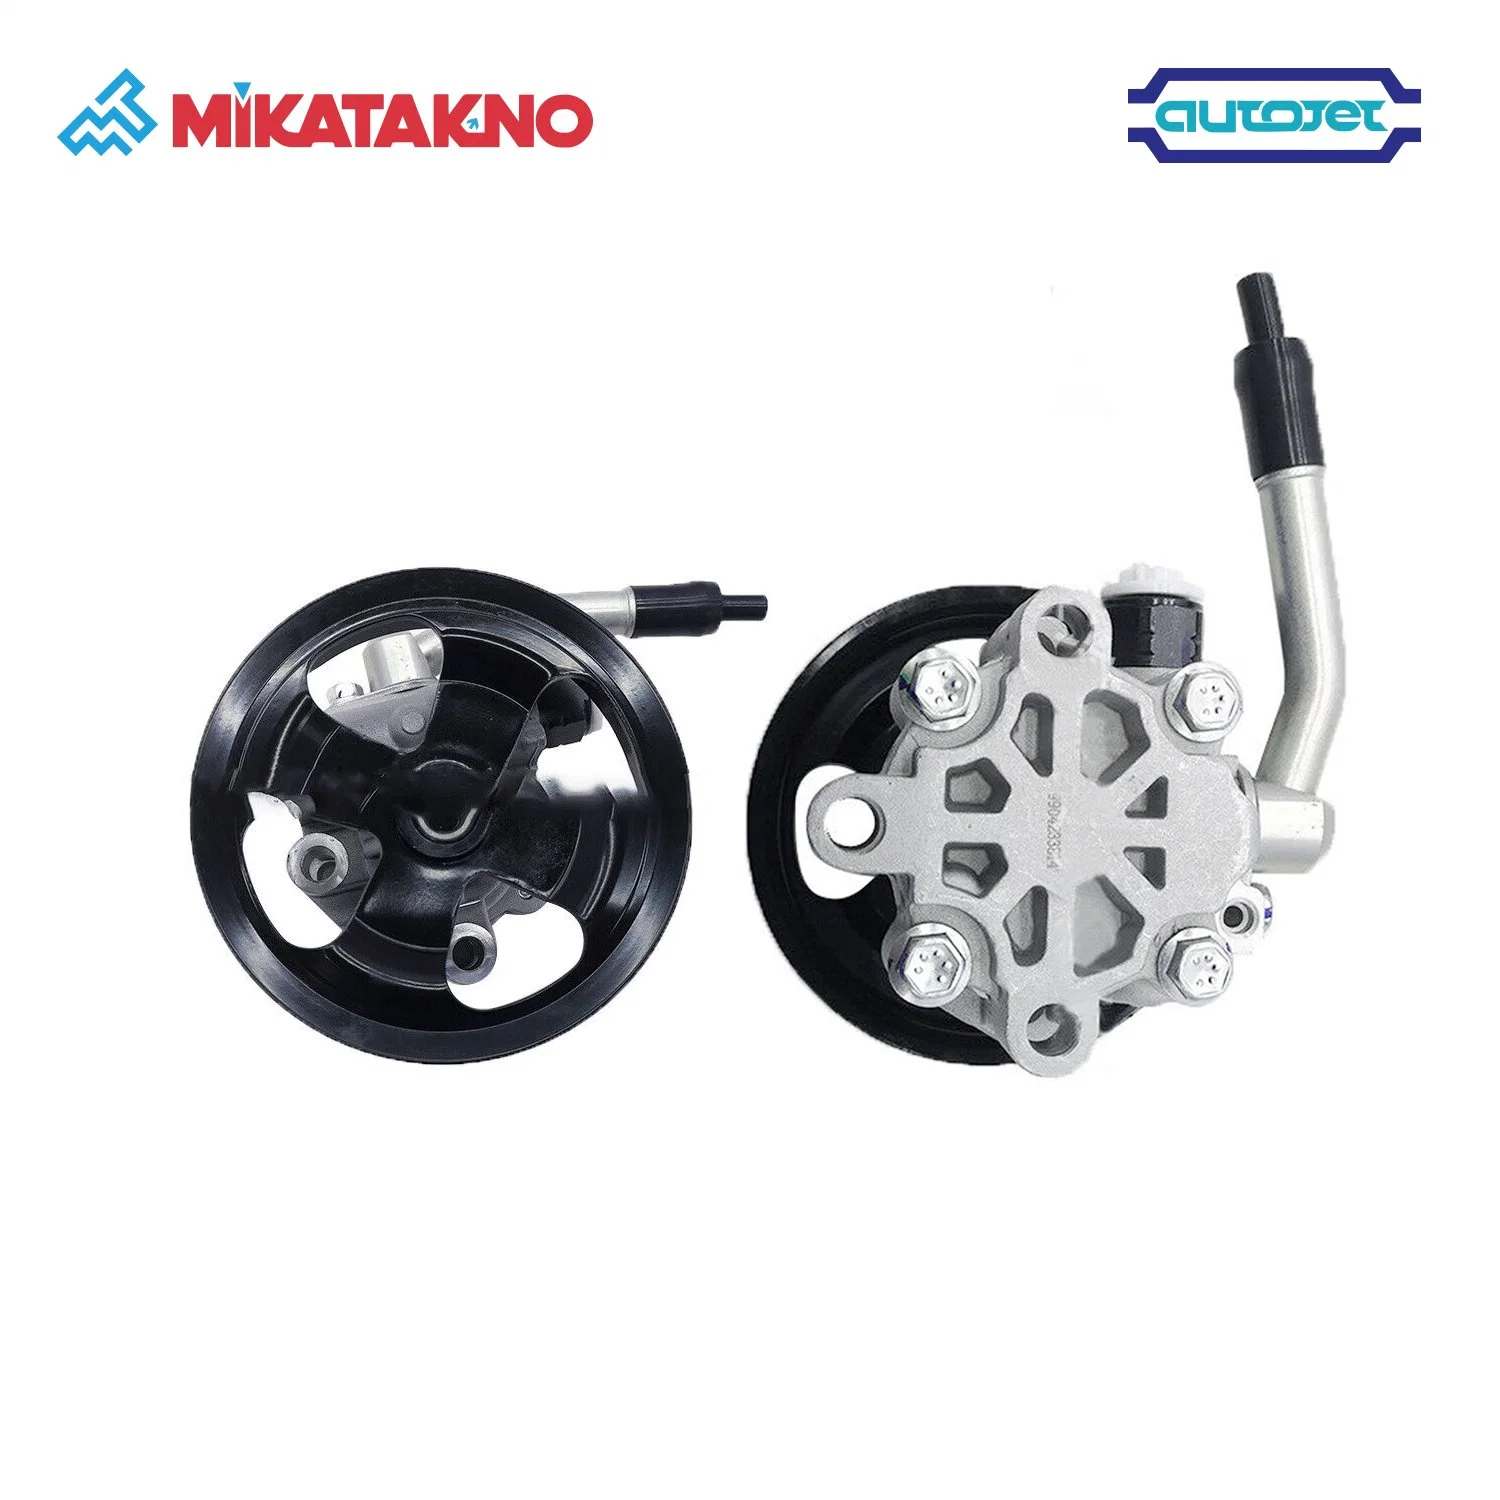 for Toyota Land Cruiser Fj40/60 /Auto Steering System/ OEM 44310-60400. Wholesale Price. Supplier of Power Steering Pump